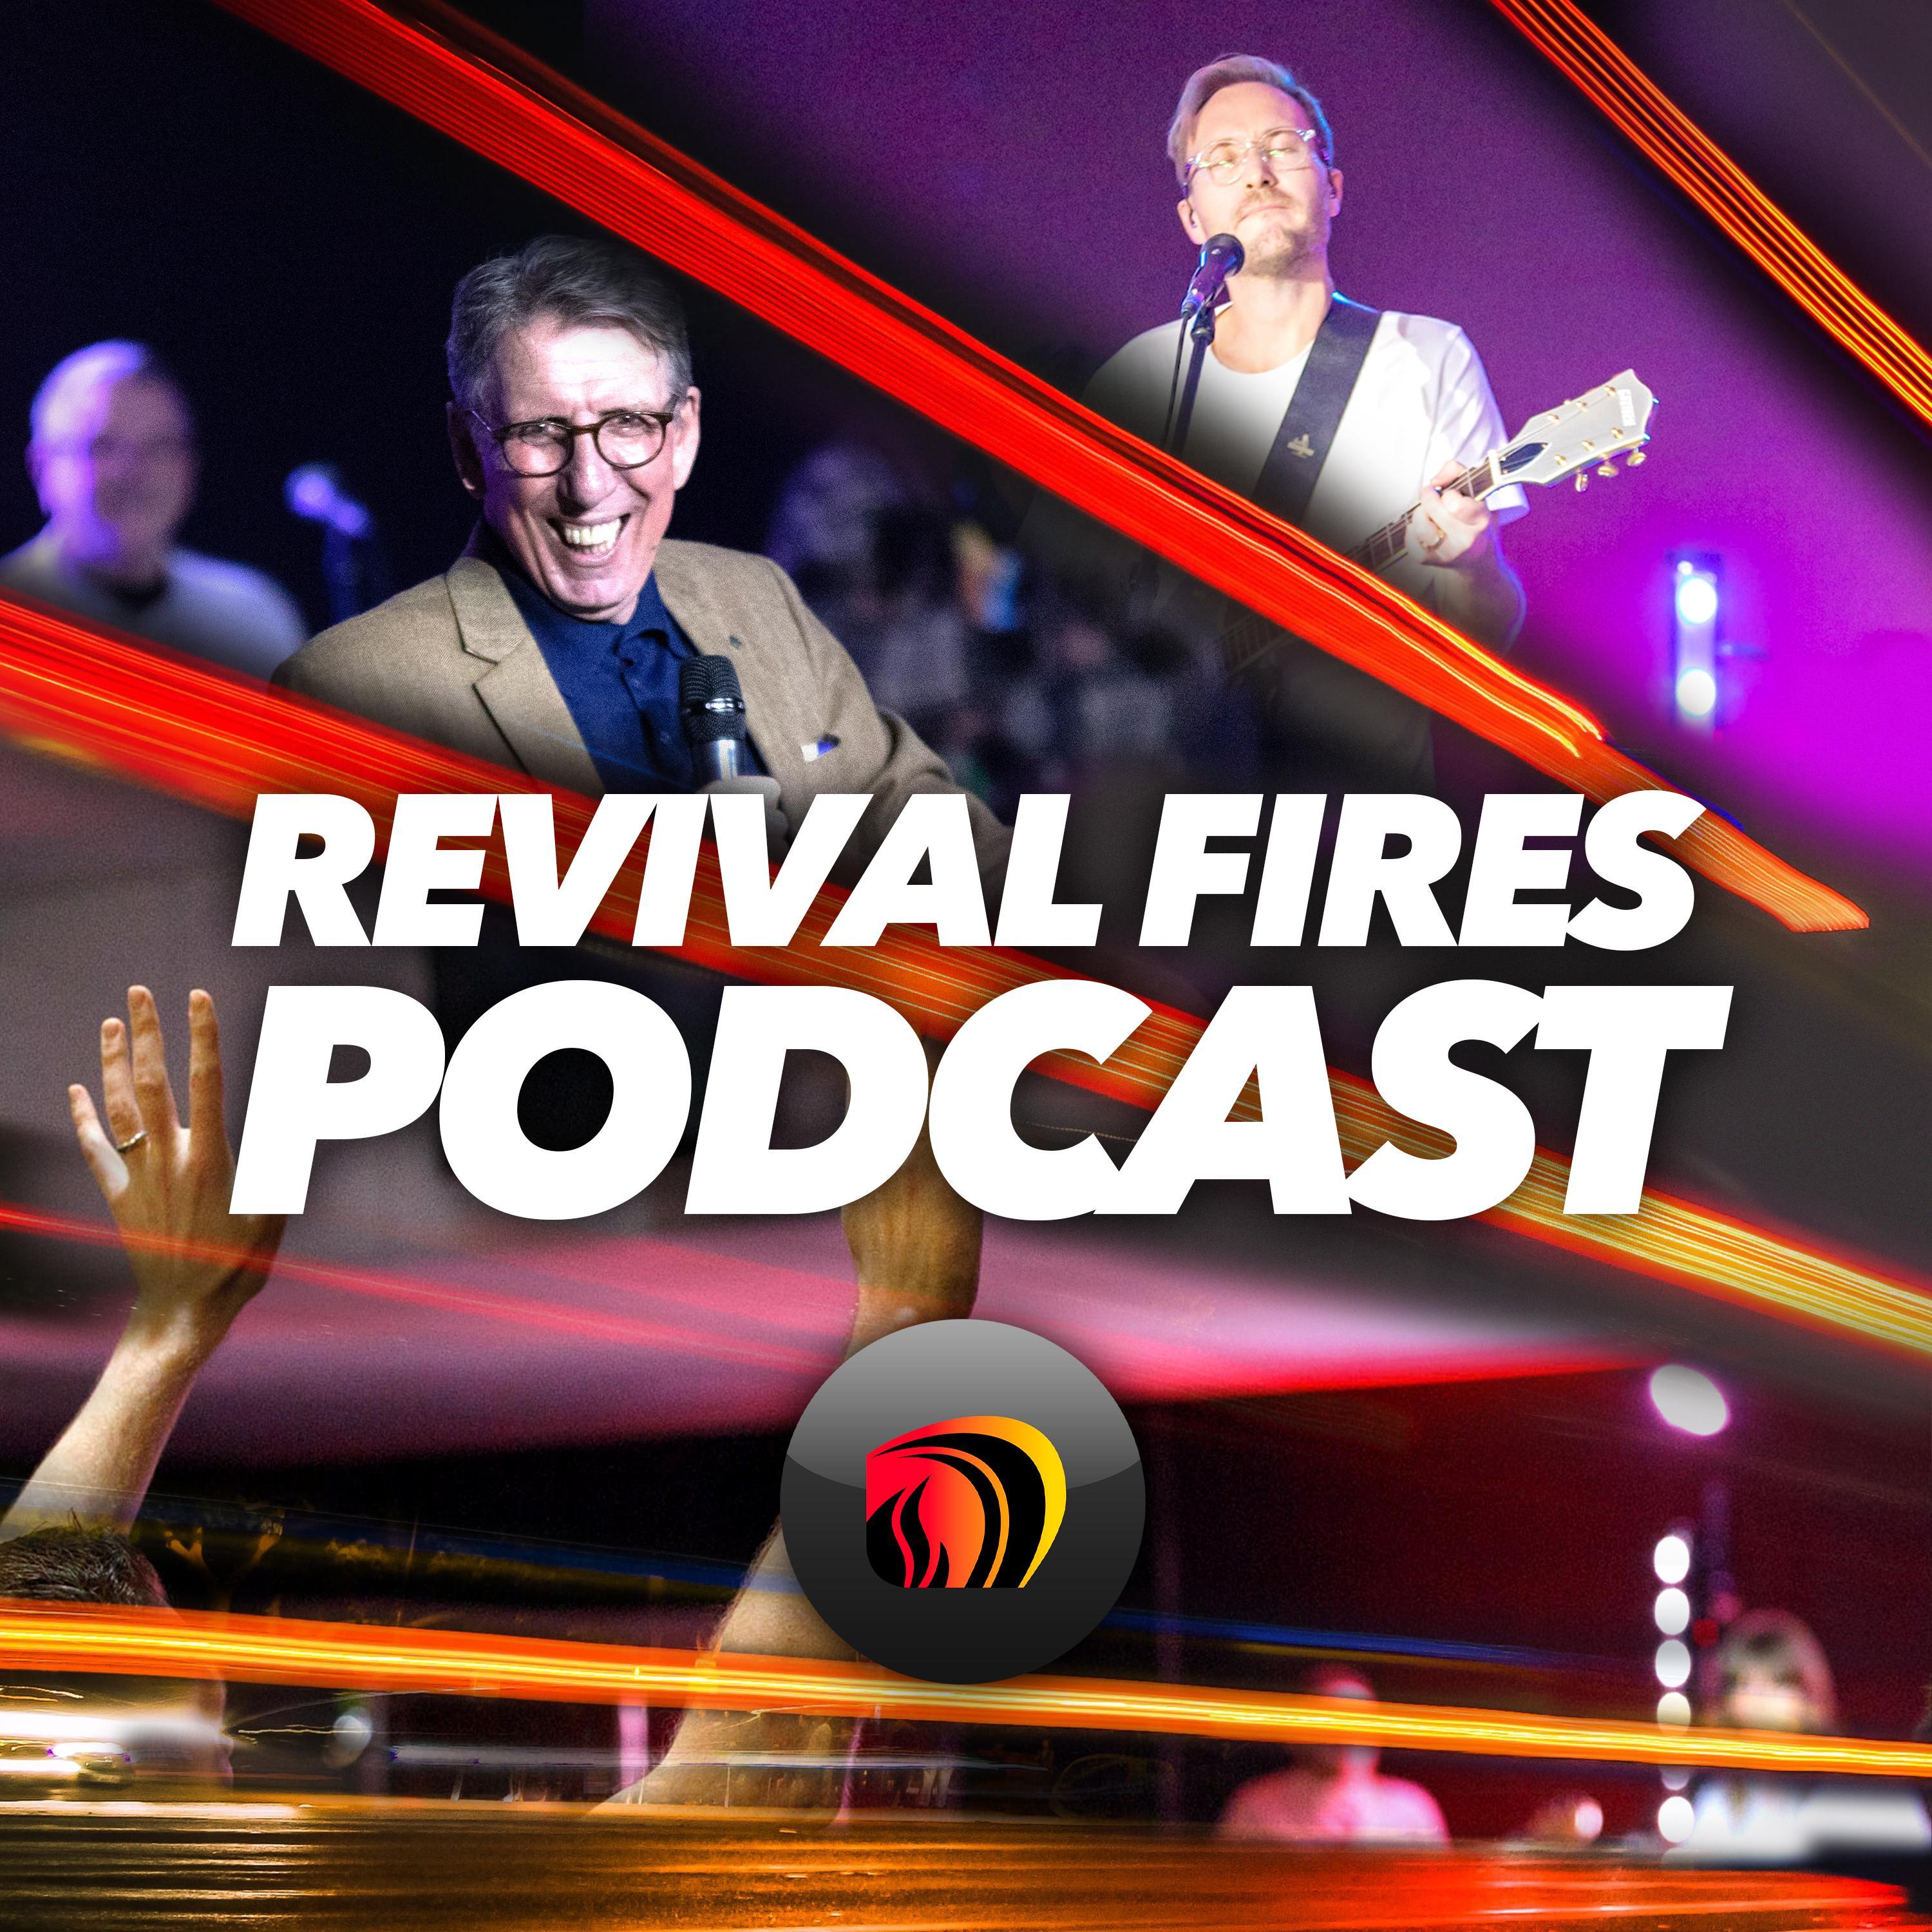 Revival Fires Podcast